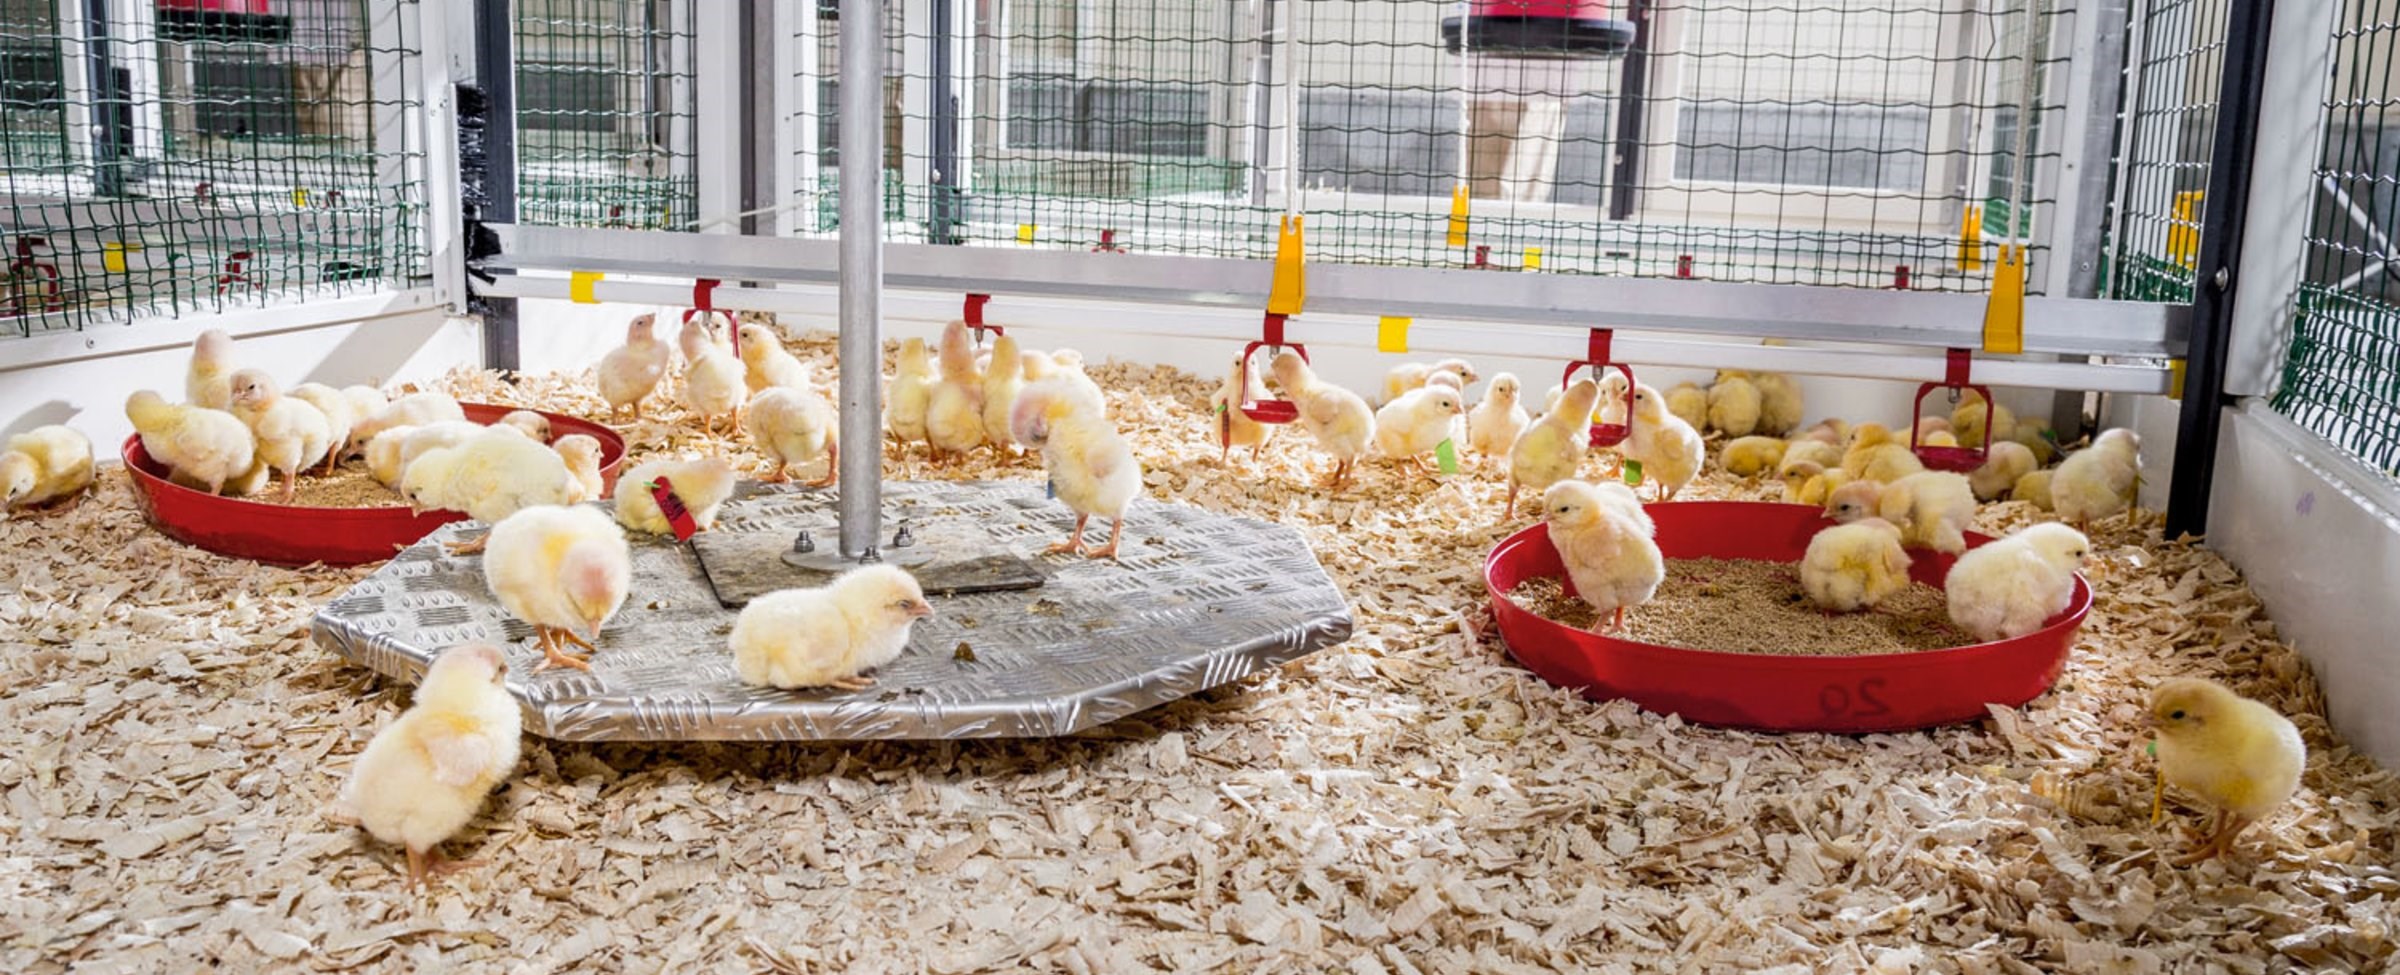 Poultry Research Facility